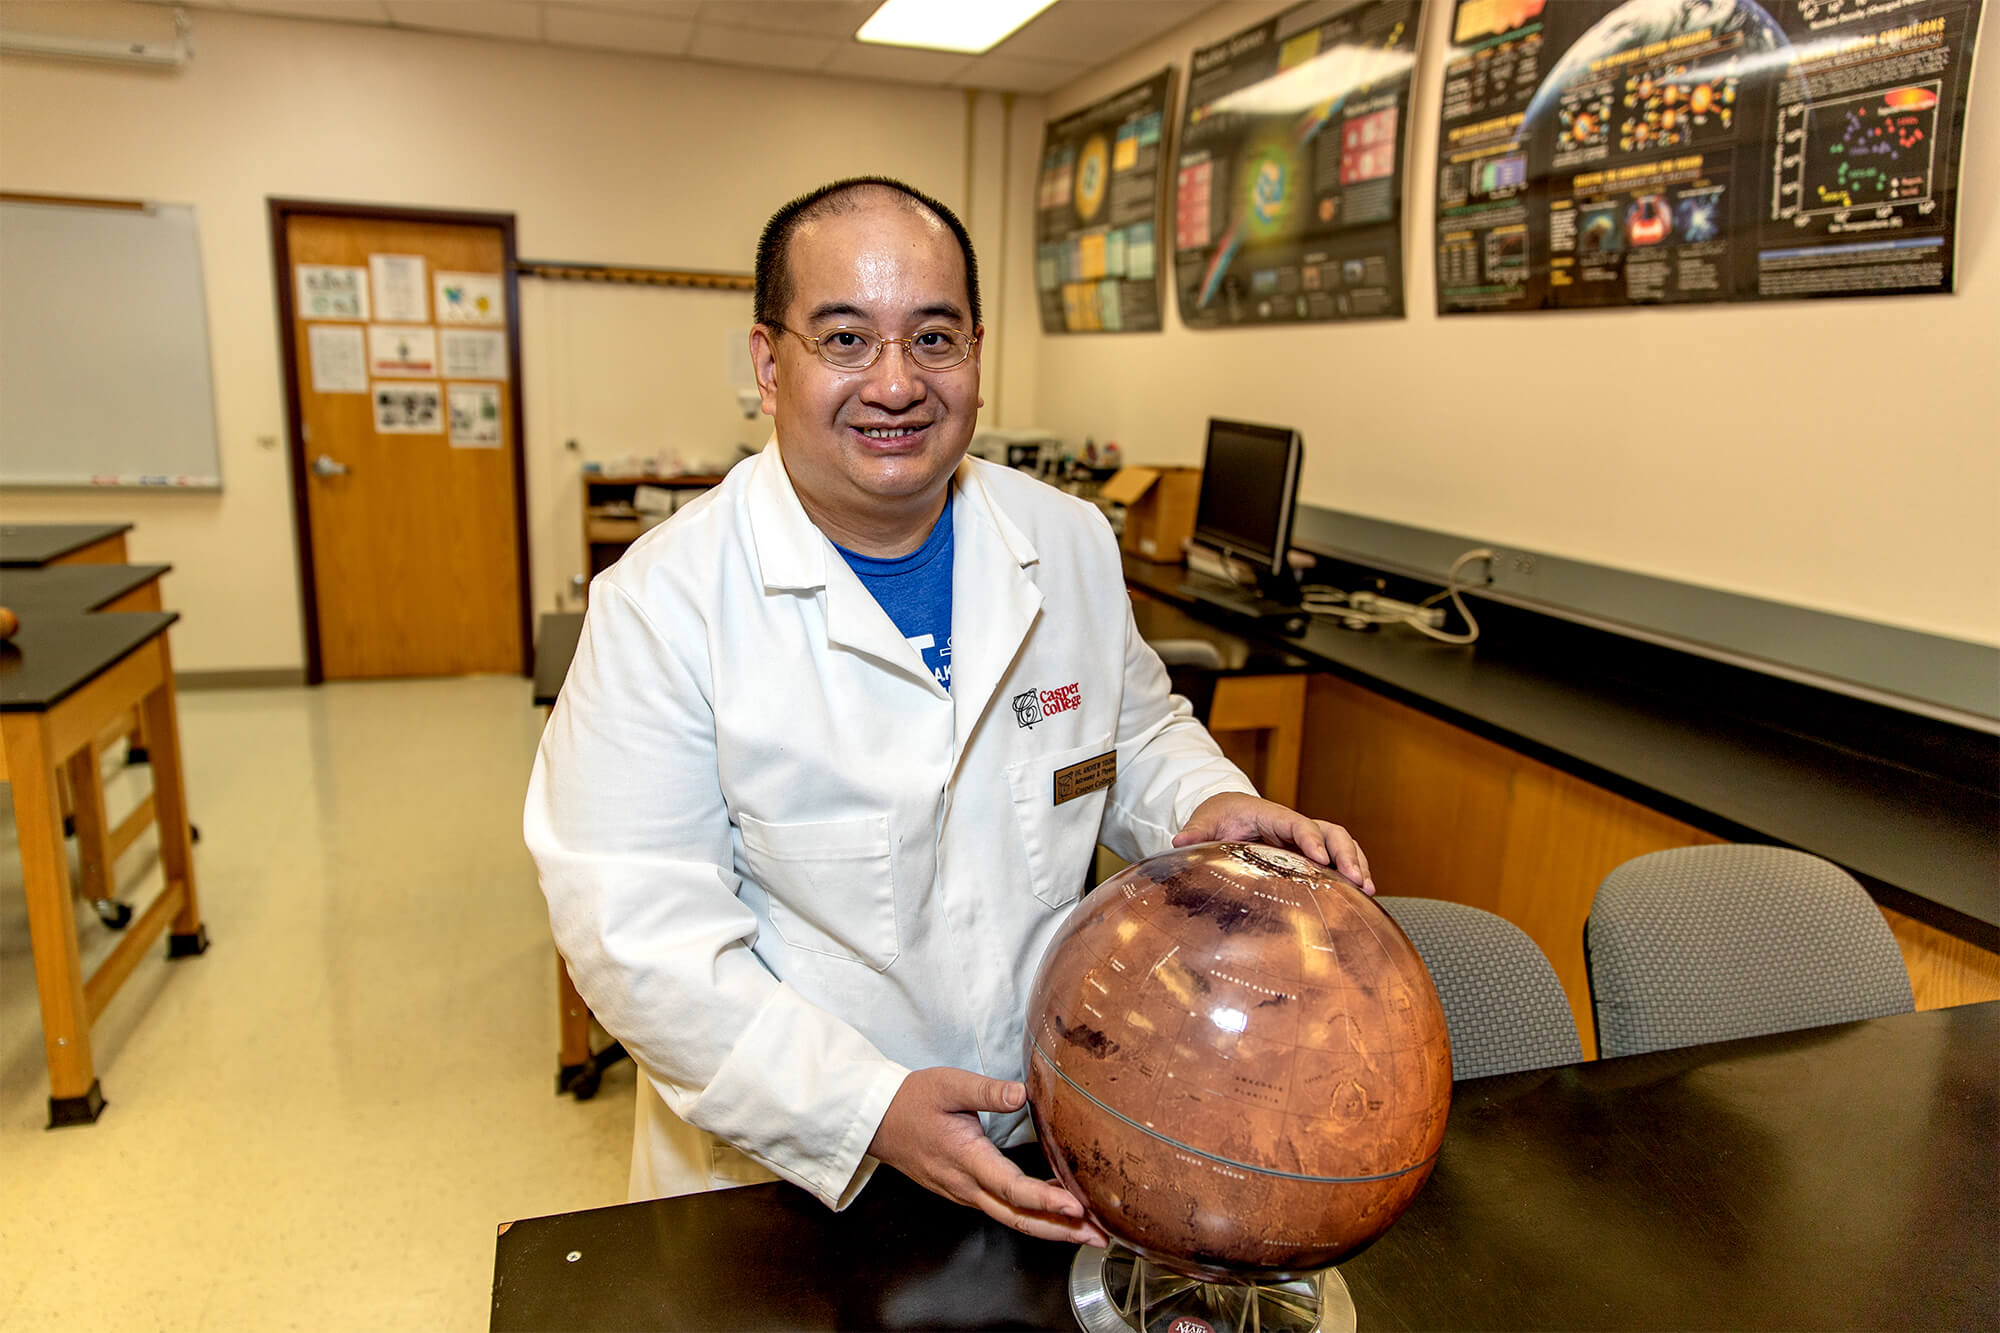 Color photograph of Casper College instructor Andrew Young, Ph.D.